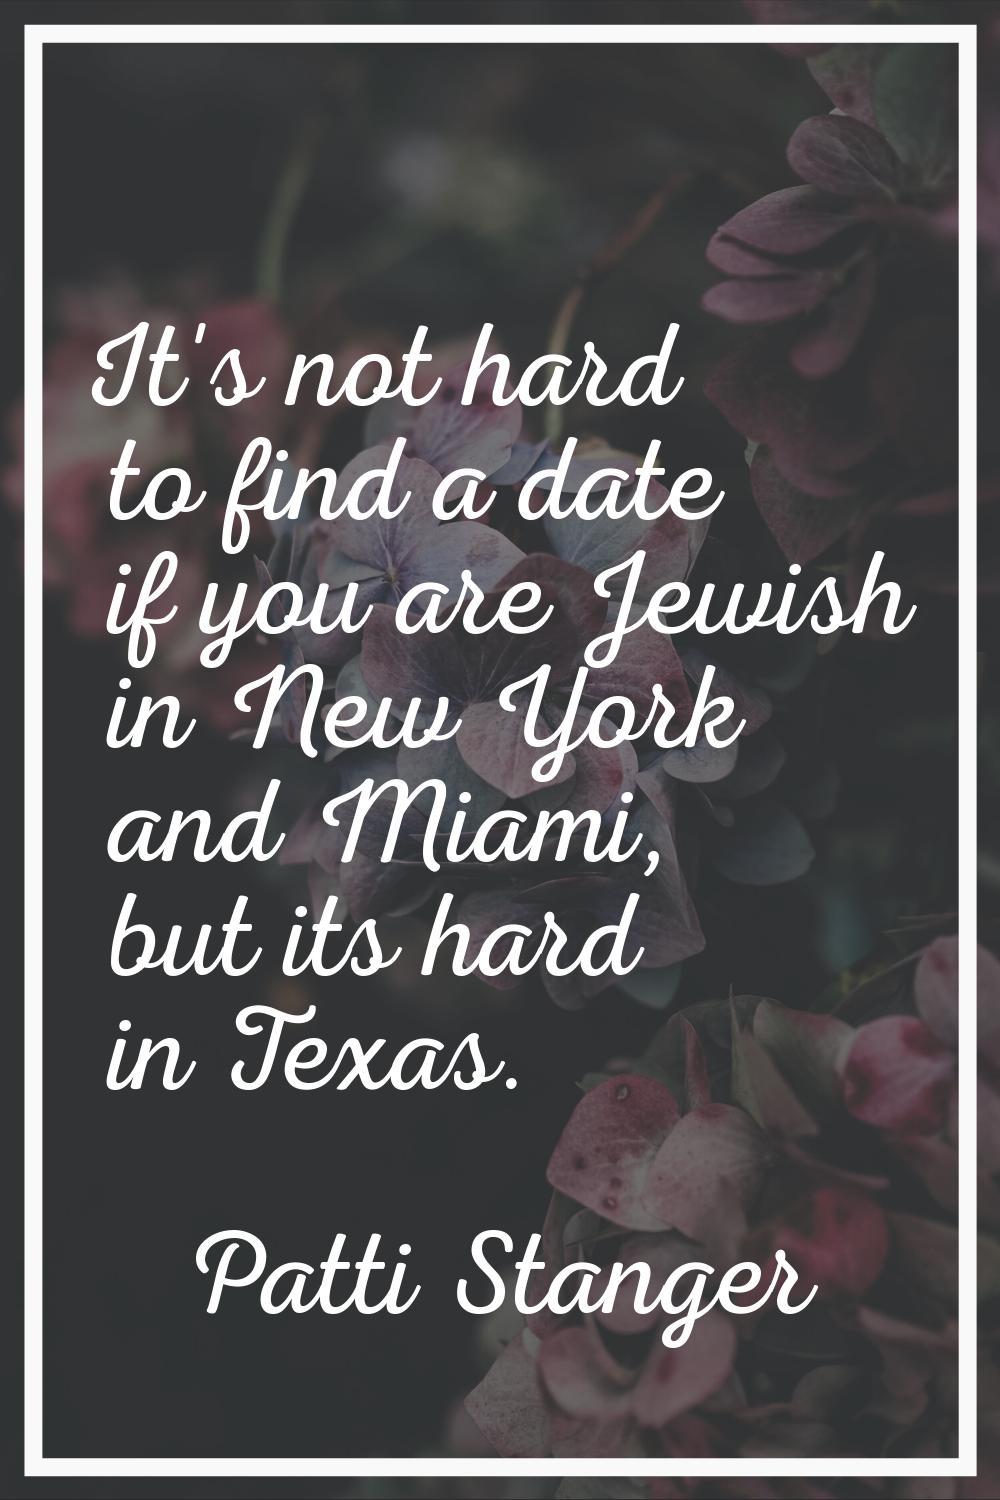 It's not hard to find a date if you are Jewish in New York and Miami, but its hard in Texas.